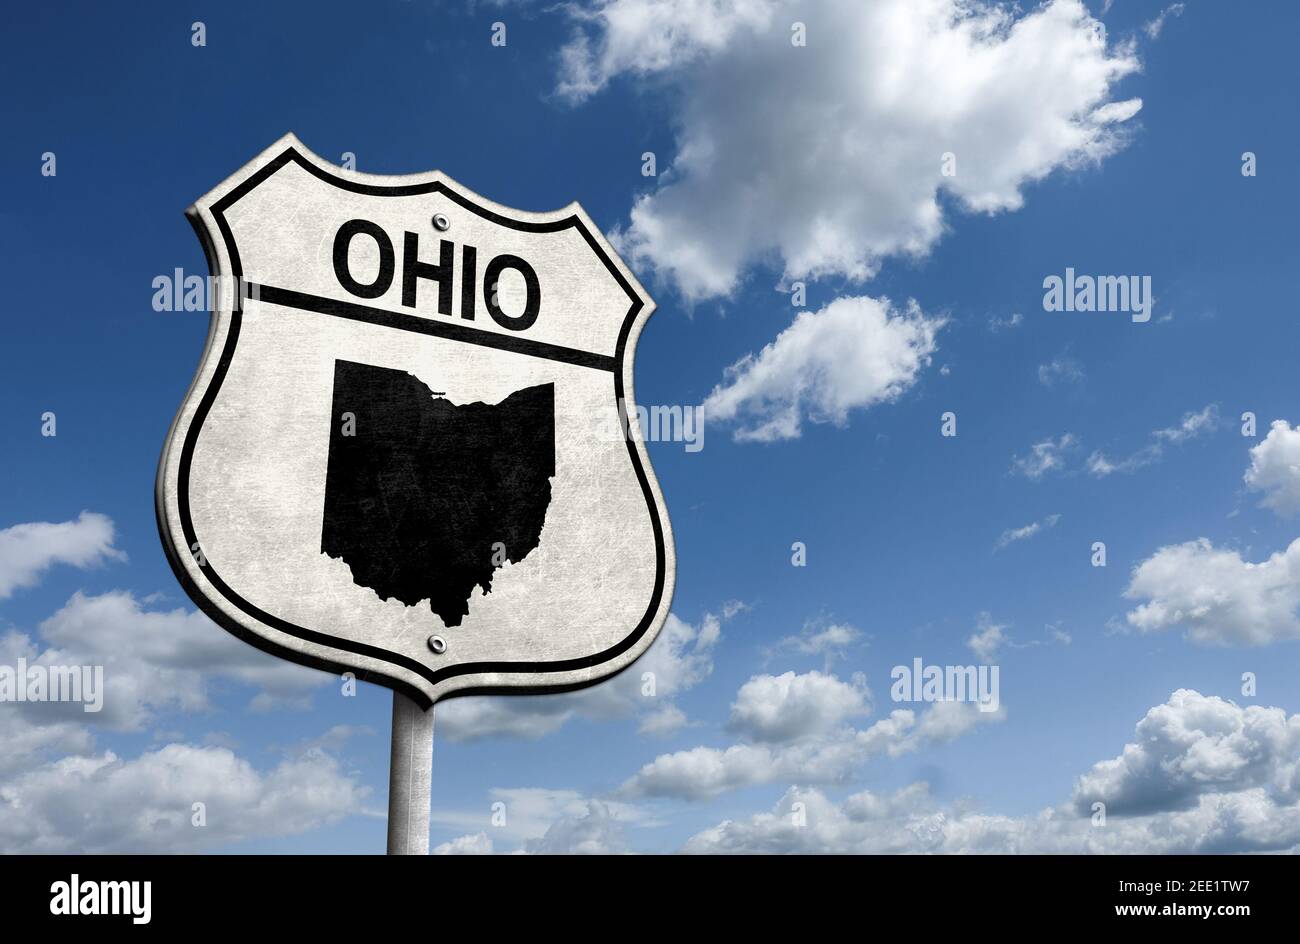 Road sign for US State of Ohio Stock Photo